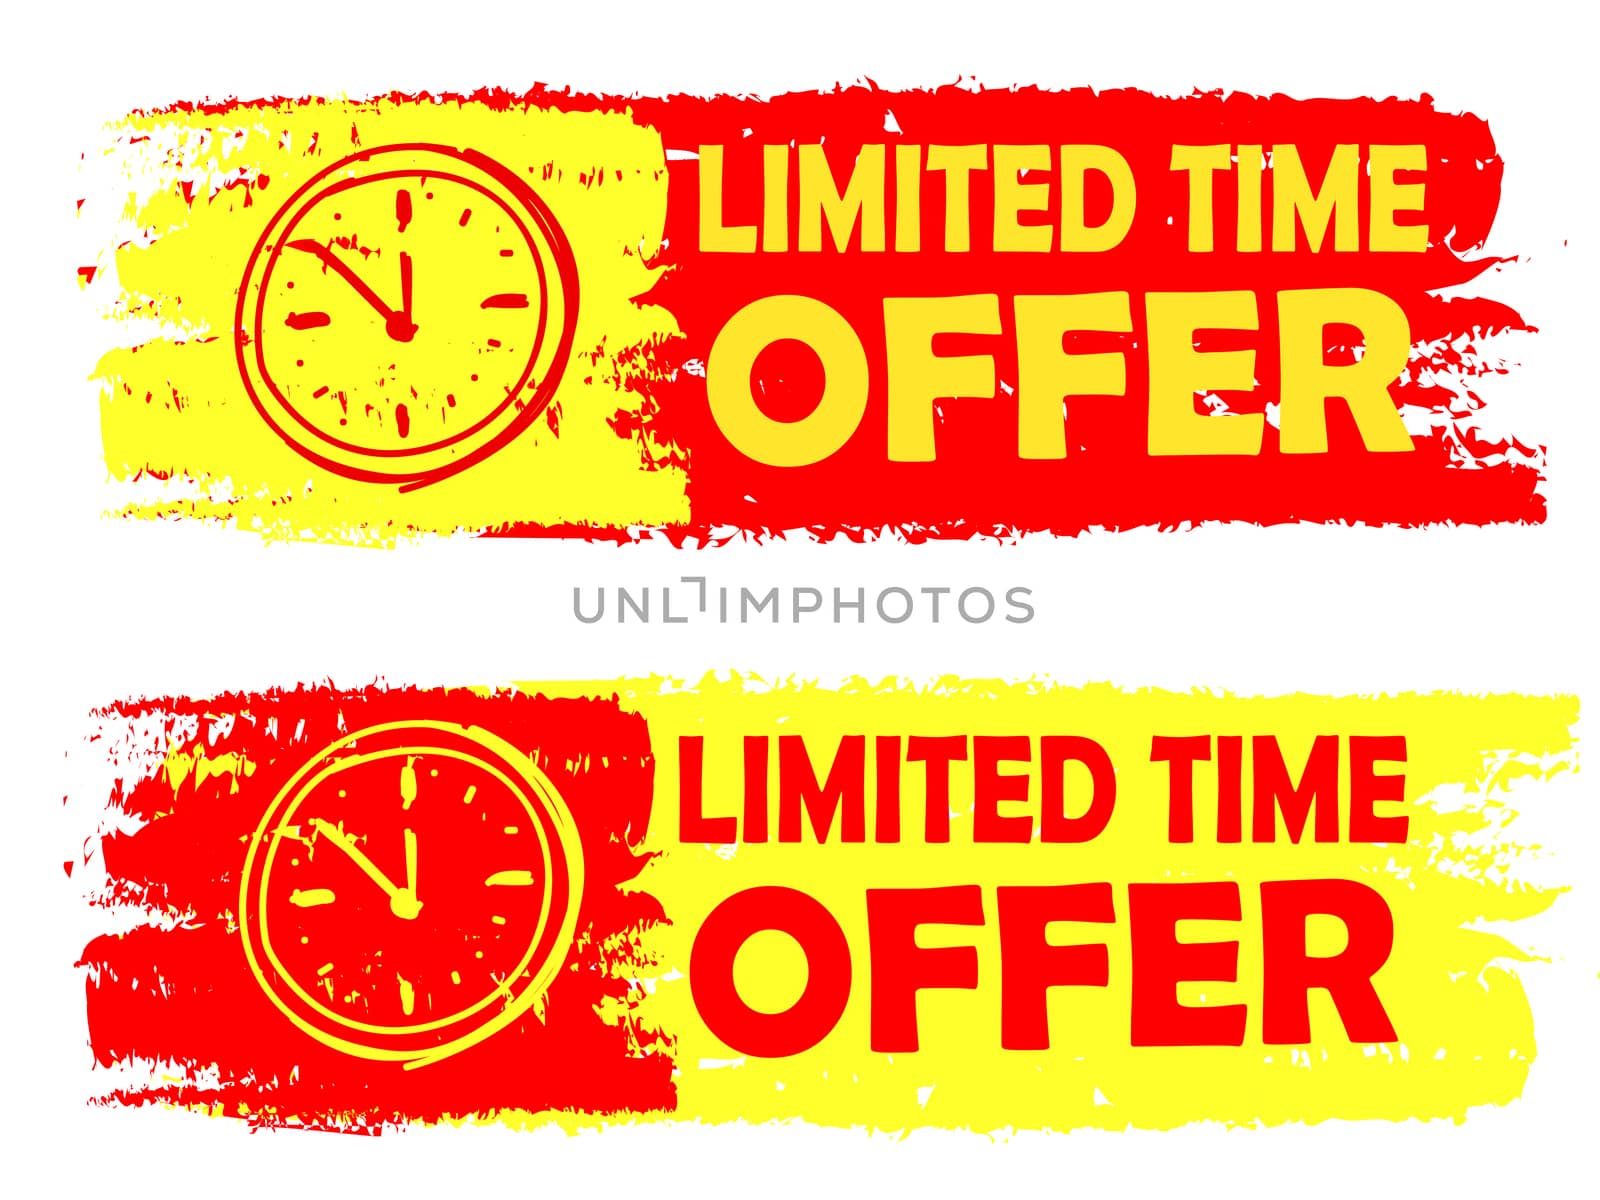 limited time offer with clock sign, yellow and red drawn labels by marinini